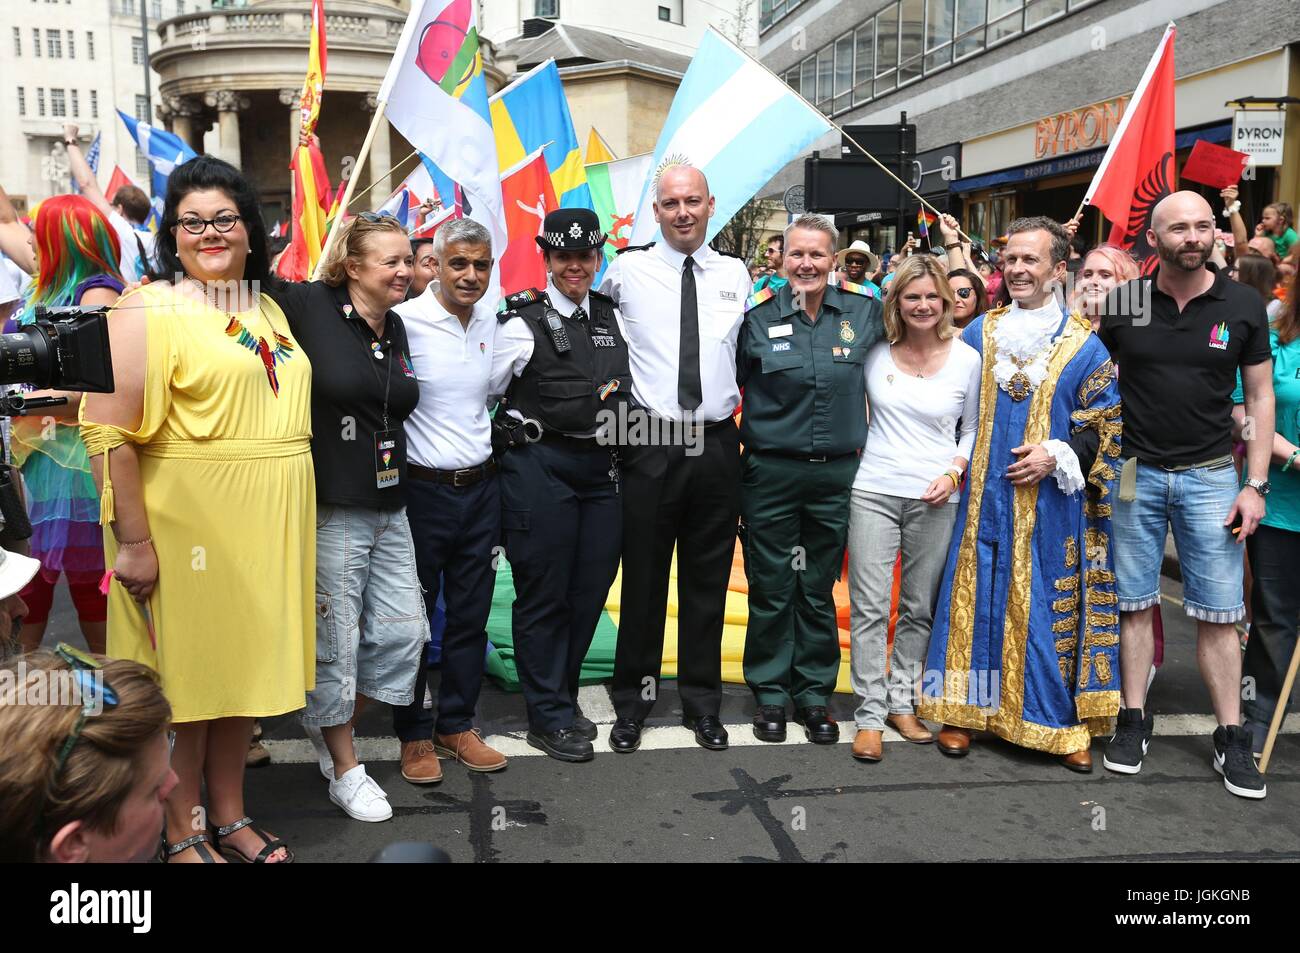 Night Czar Amy Lame (left), Mayor of London Sadiq Khan (third left) and Education Secretary Justine Greening (third right) during the Pride in London Parade in central London. Stock Photo